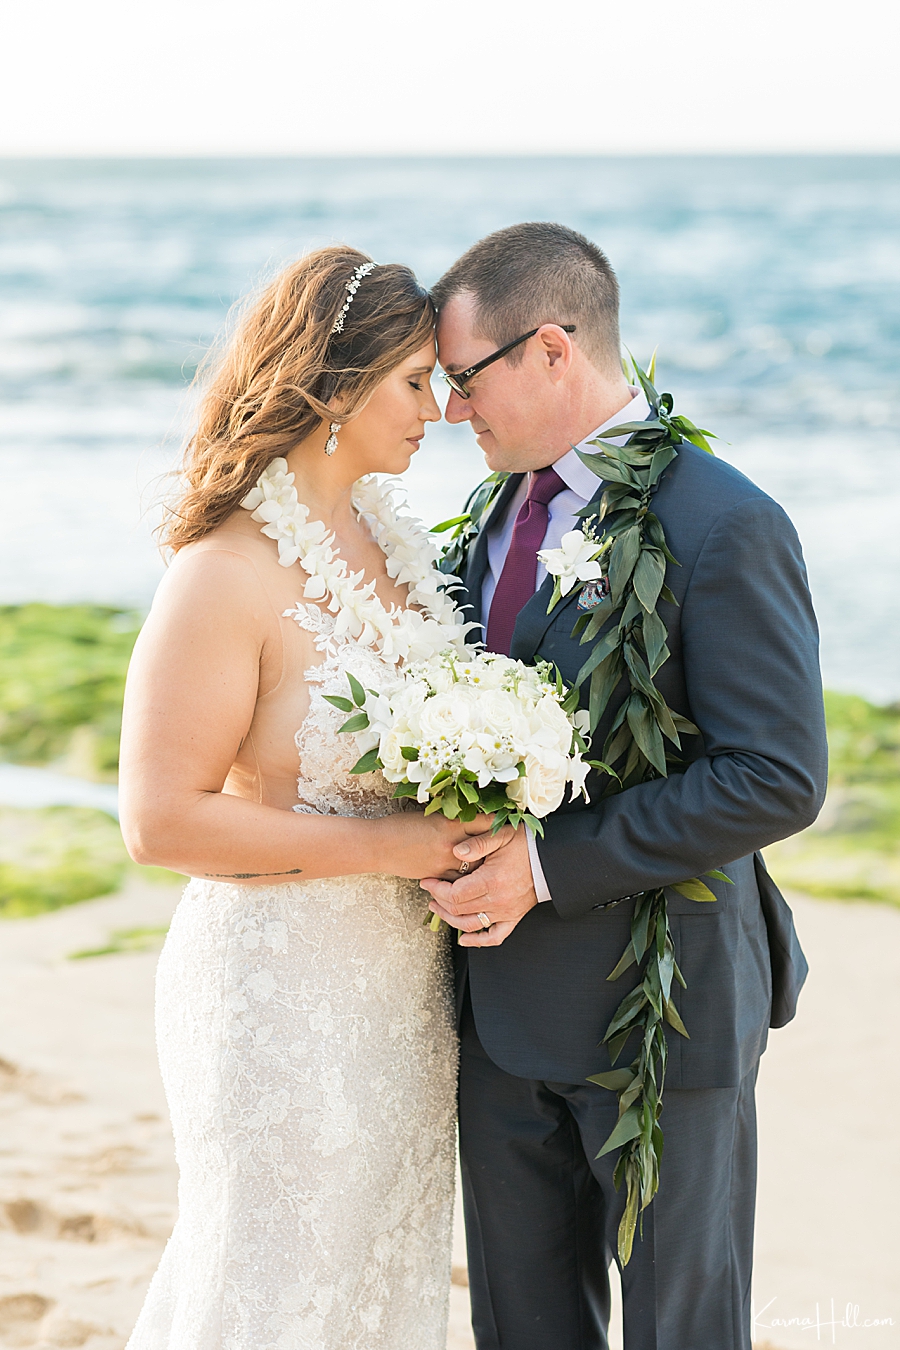 vow renewal packages hawaii